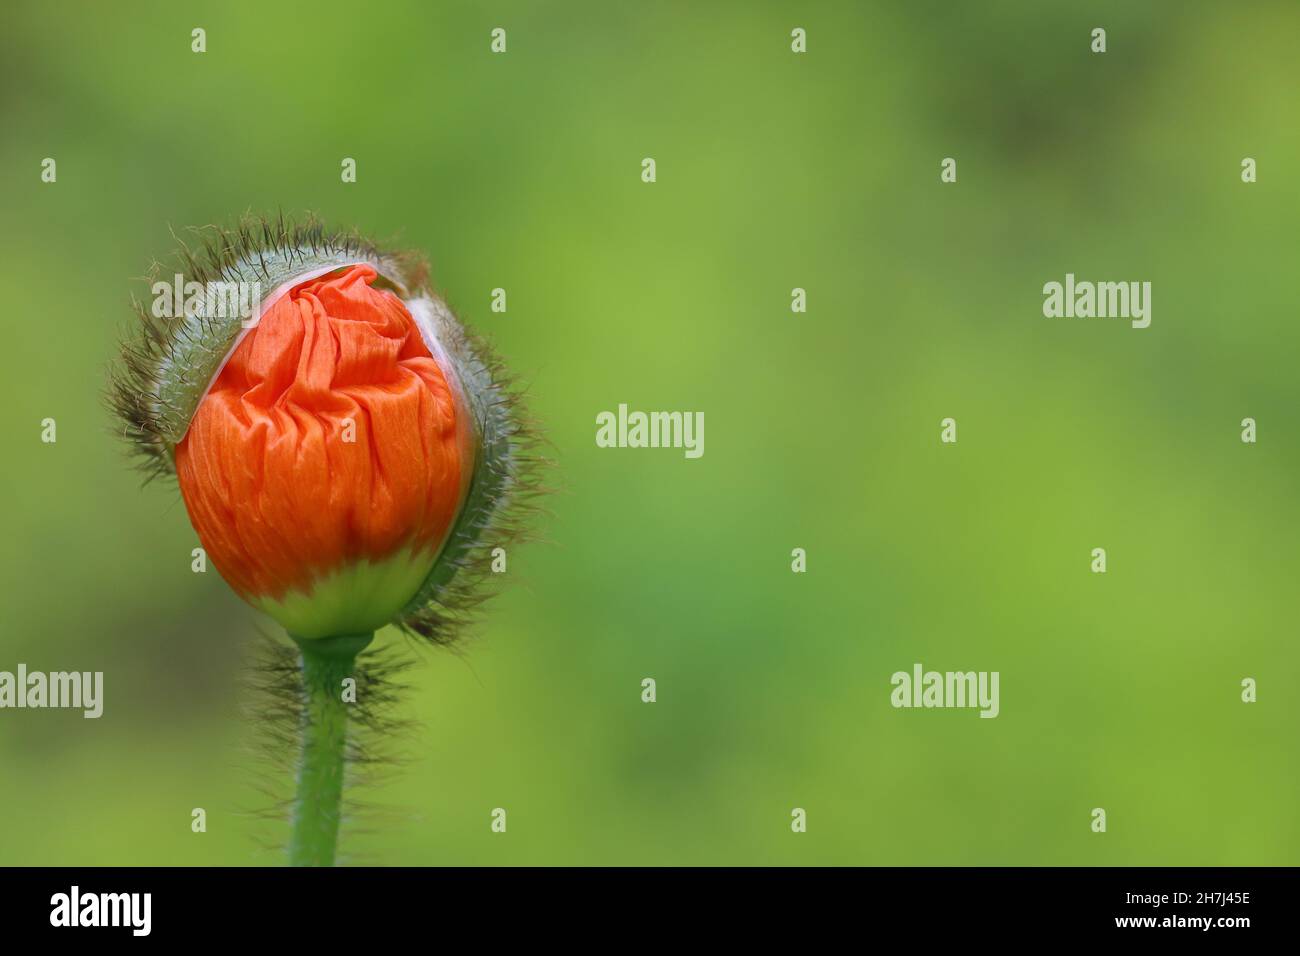 close-up of a red poppy bud against a green blurry background, side view, copy space Stock Photo